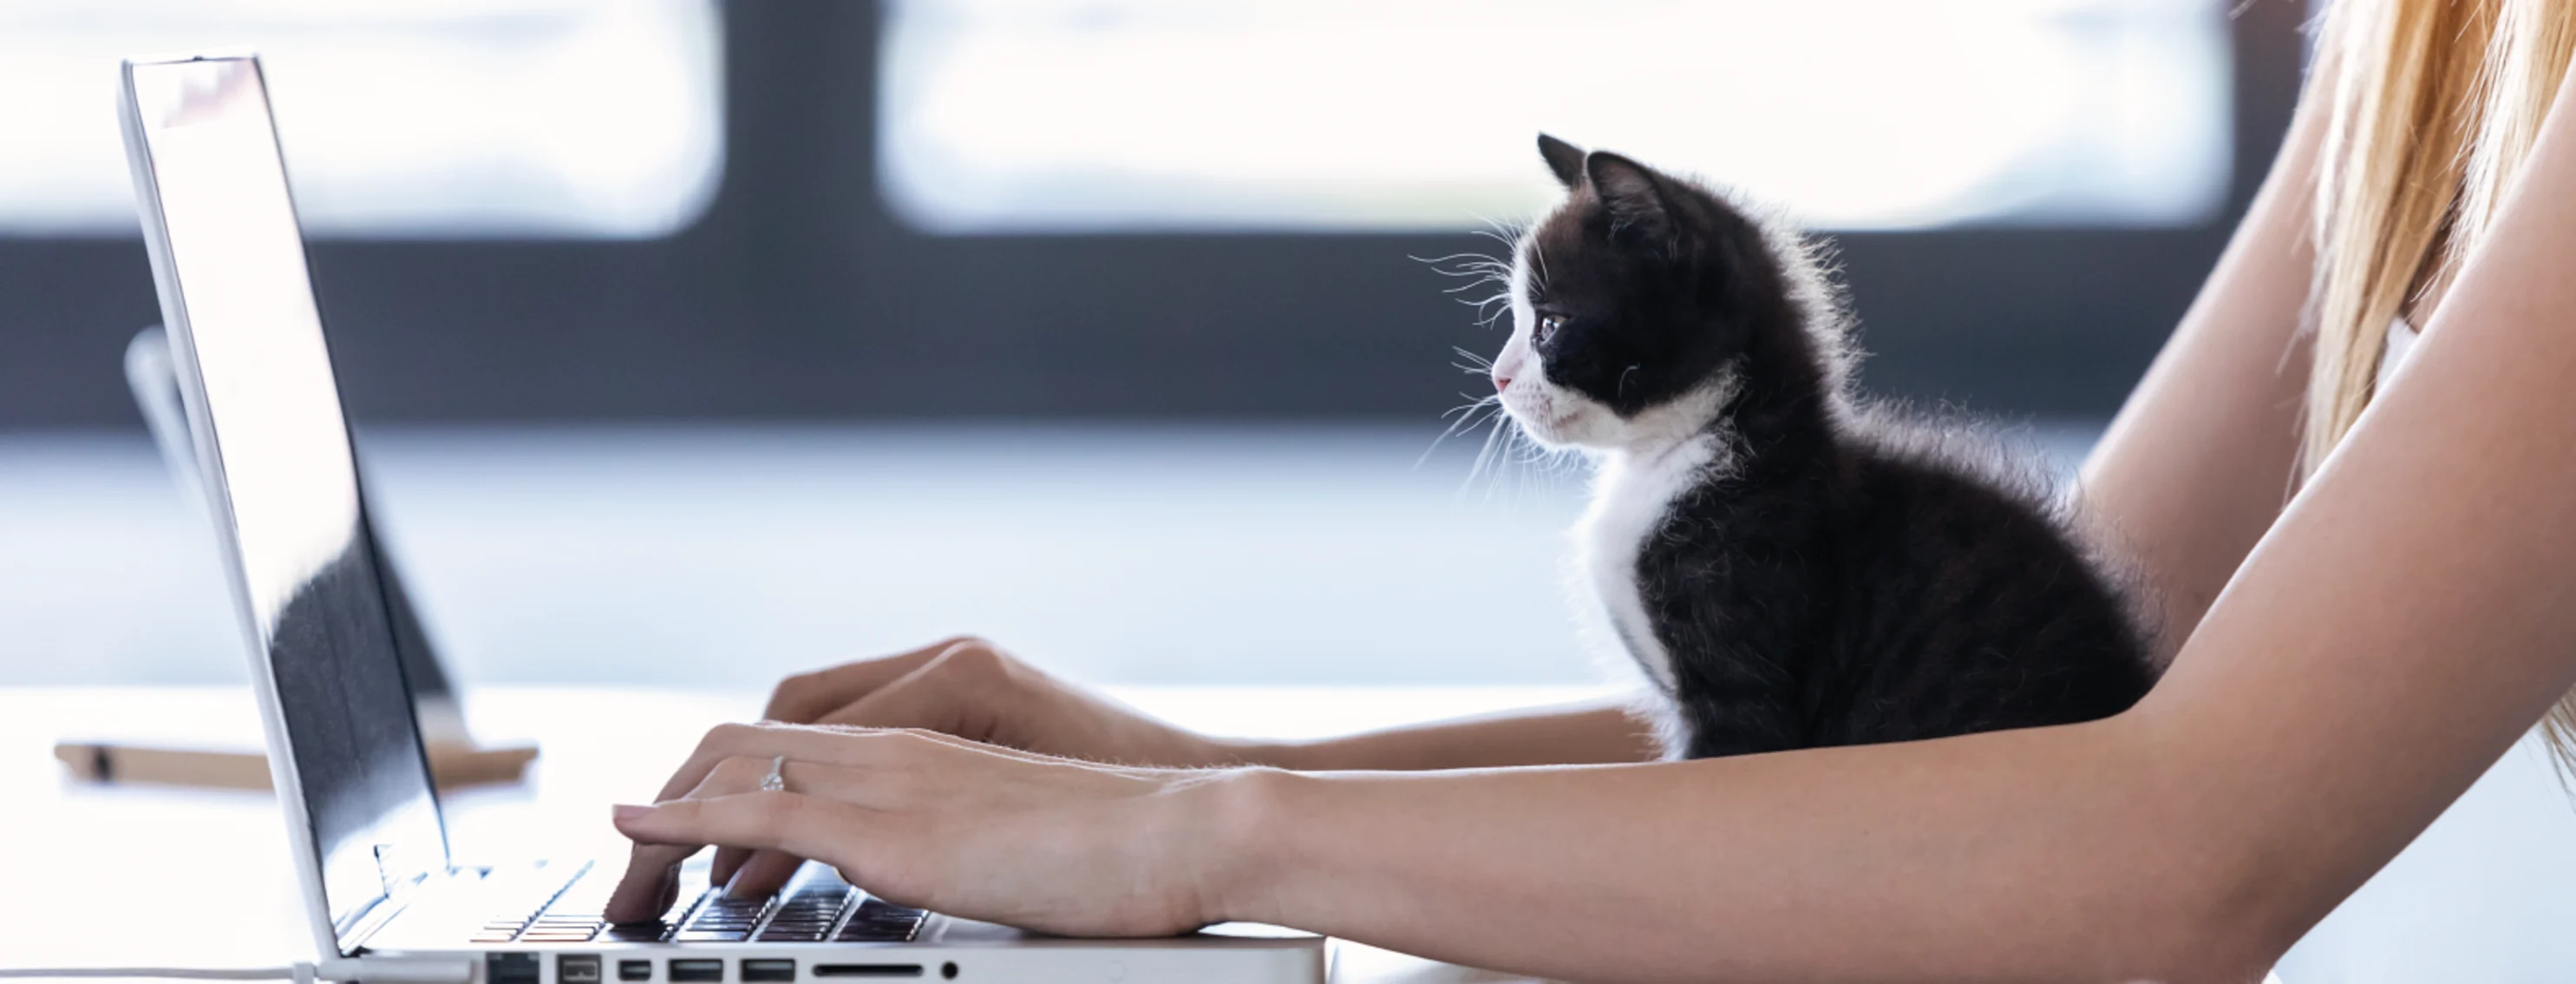 A black and white kitten sitting in front of a laptop looking at screen while a woman is working